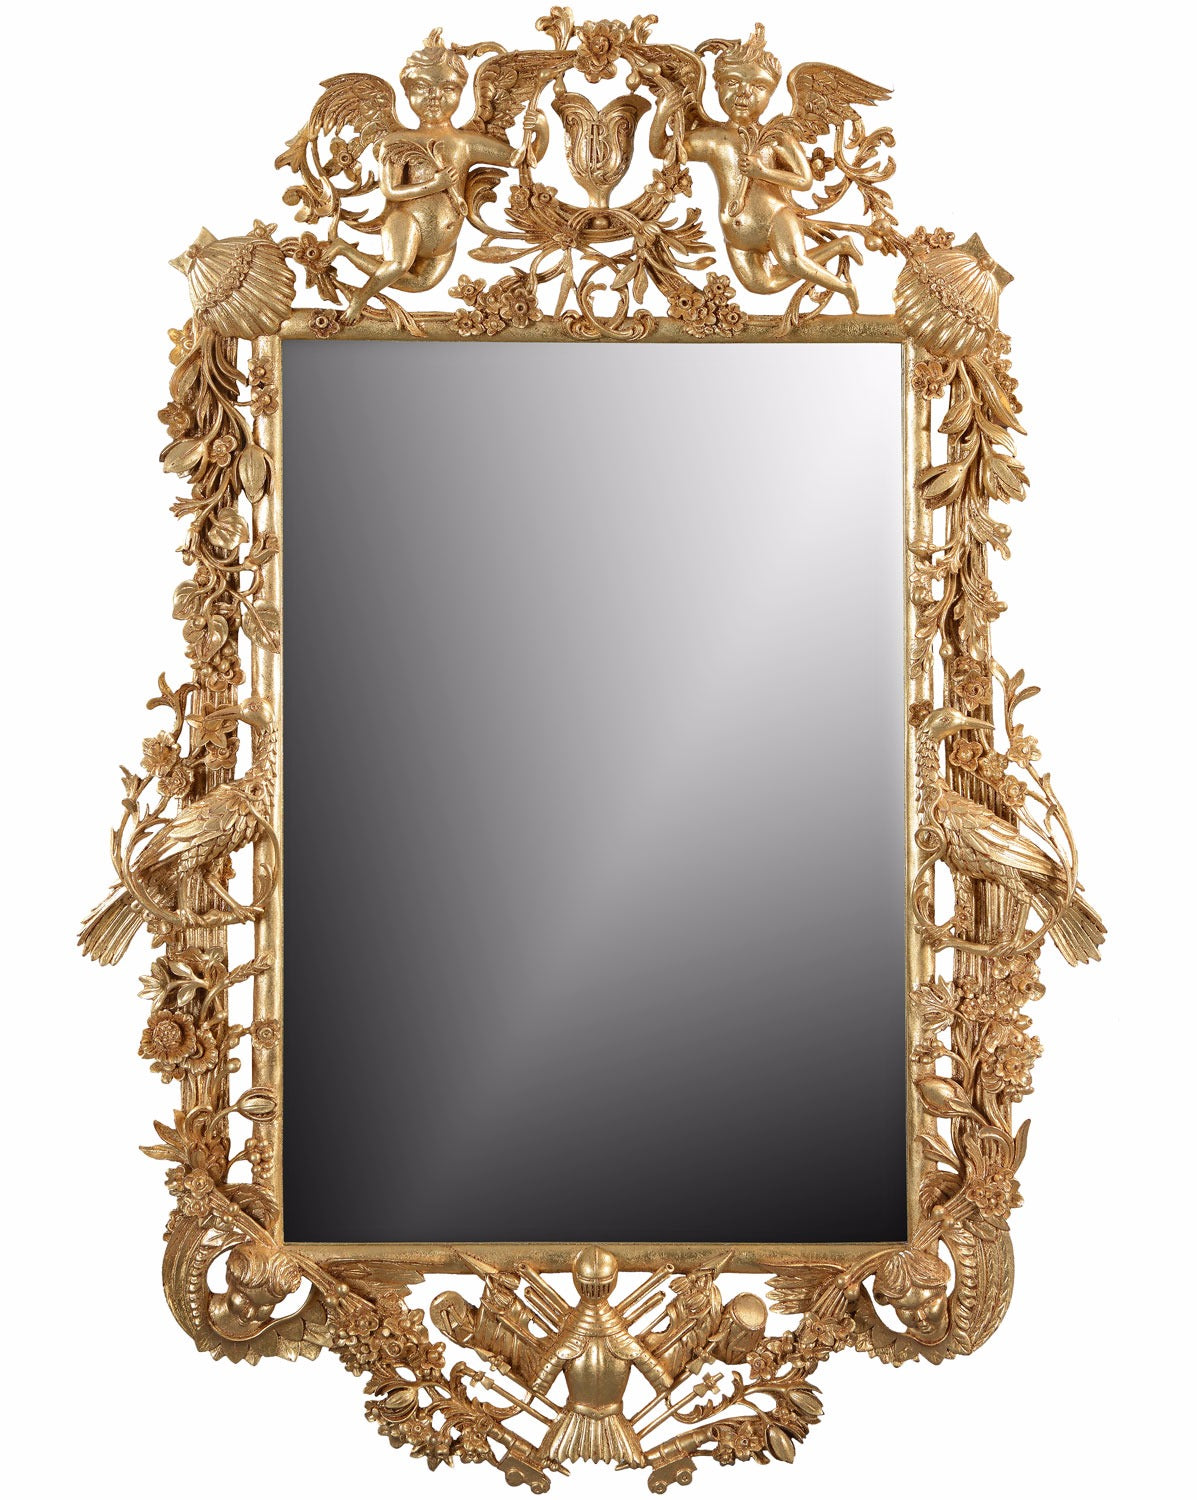 Timeless Charm: Hand-Carved Giltwood Mirror